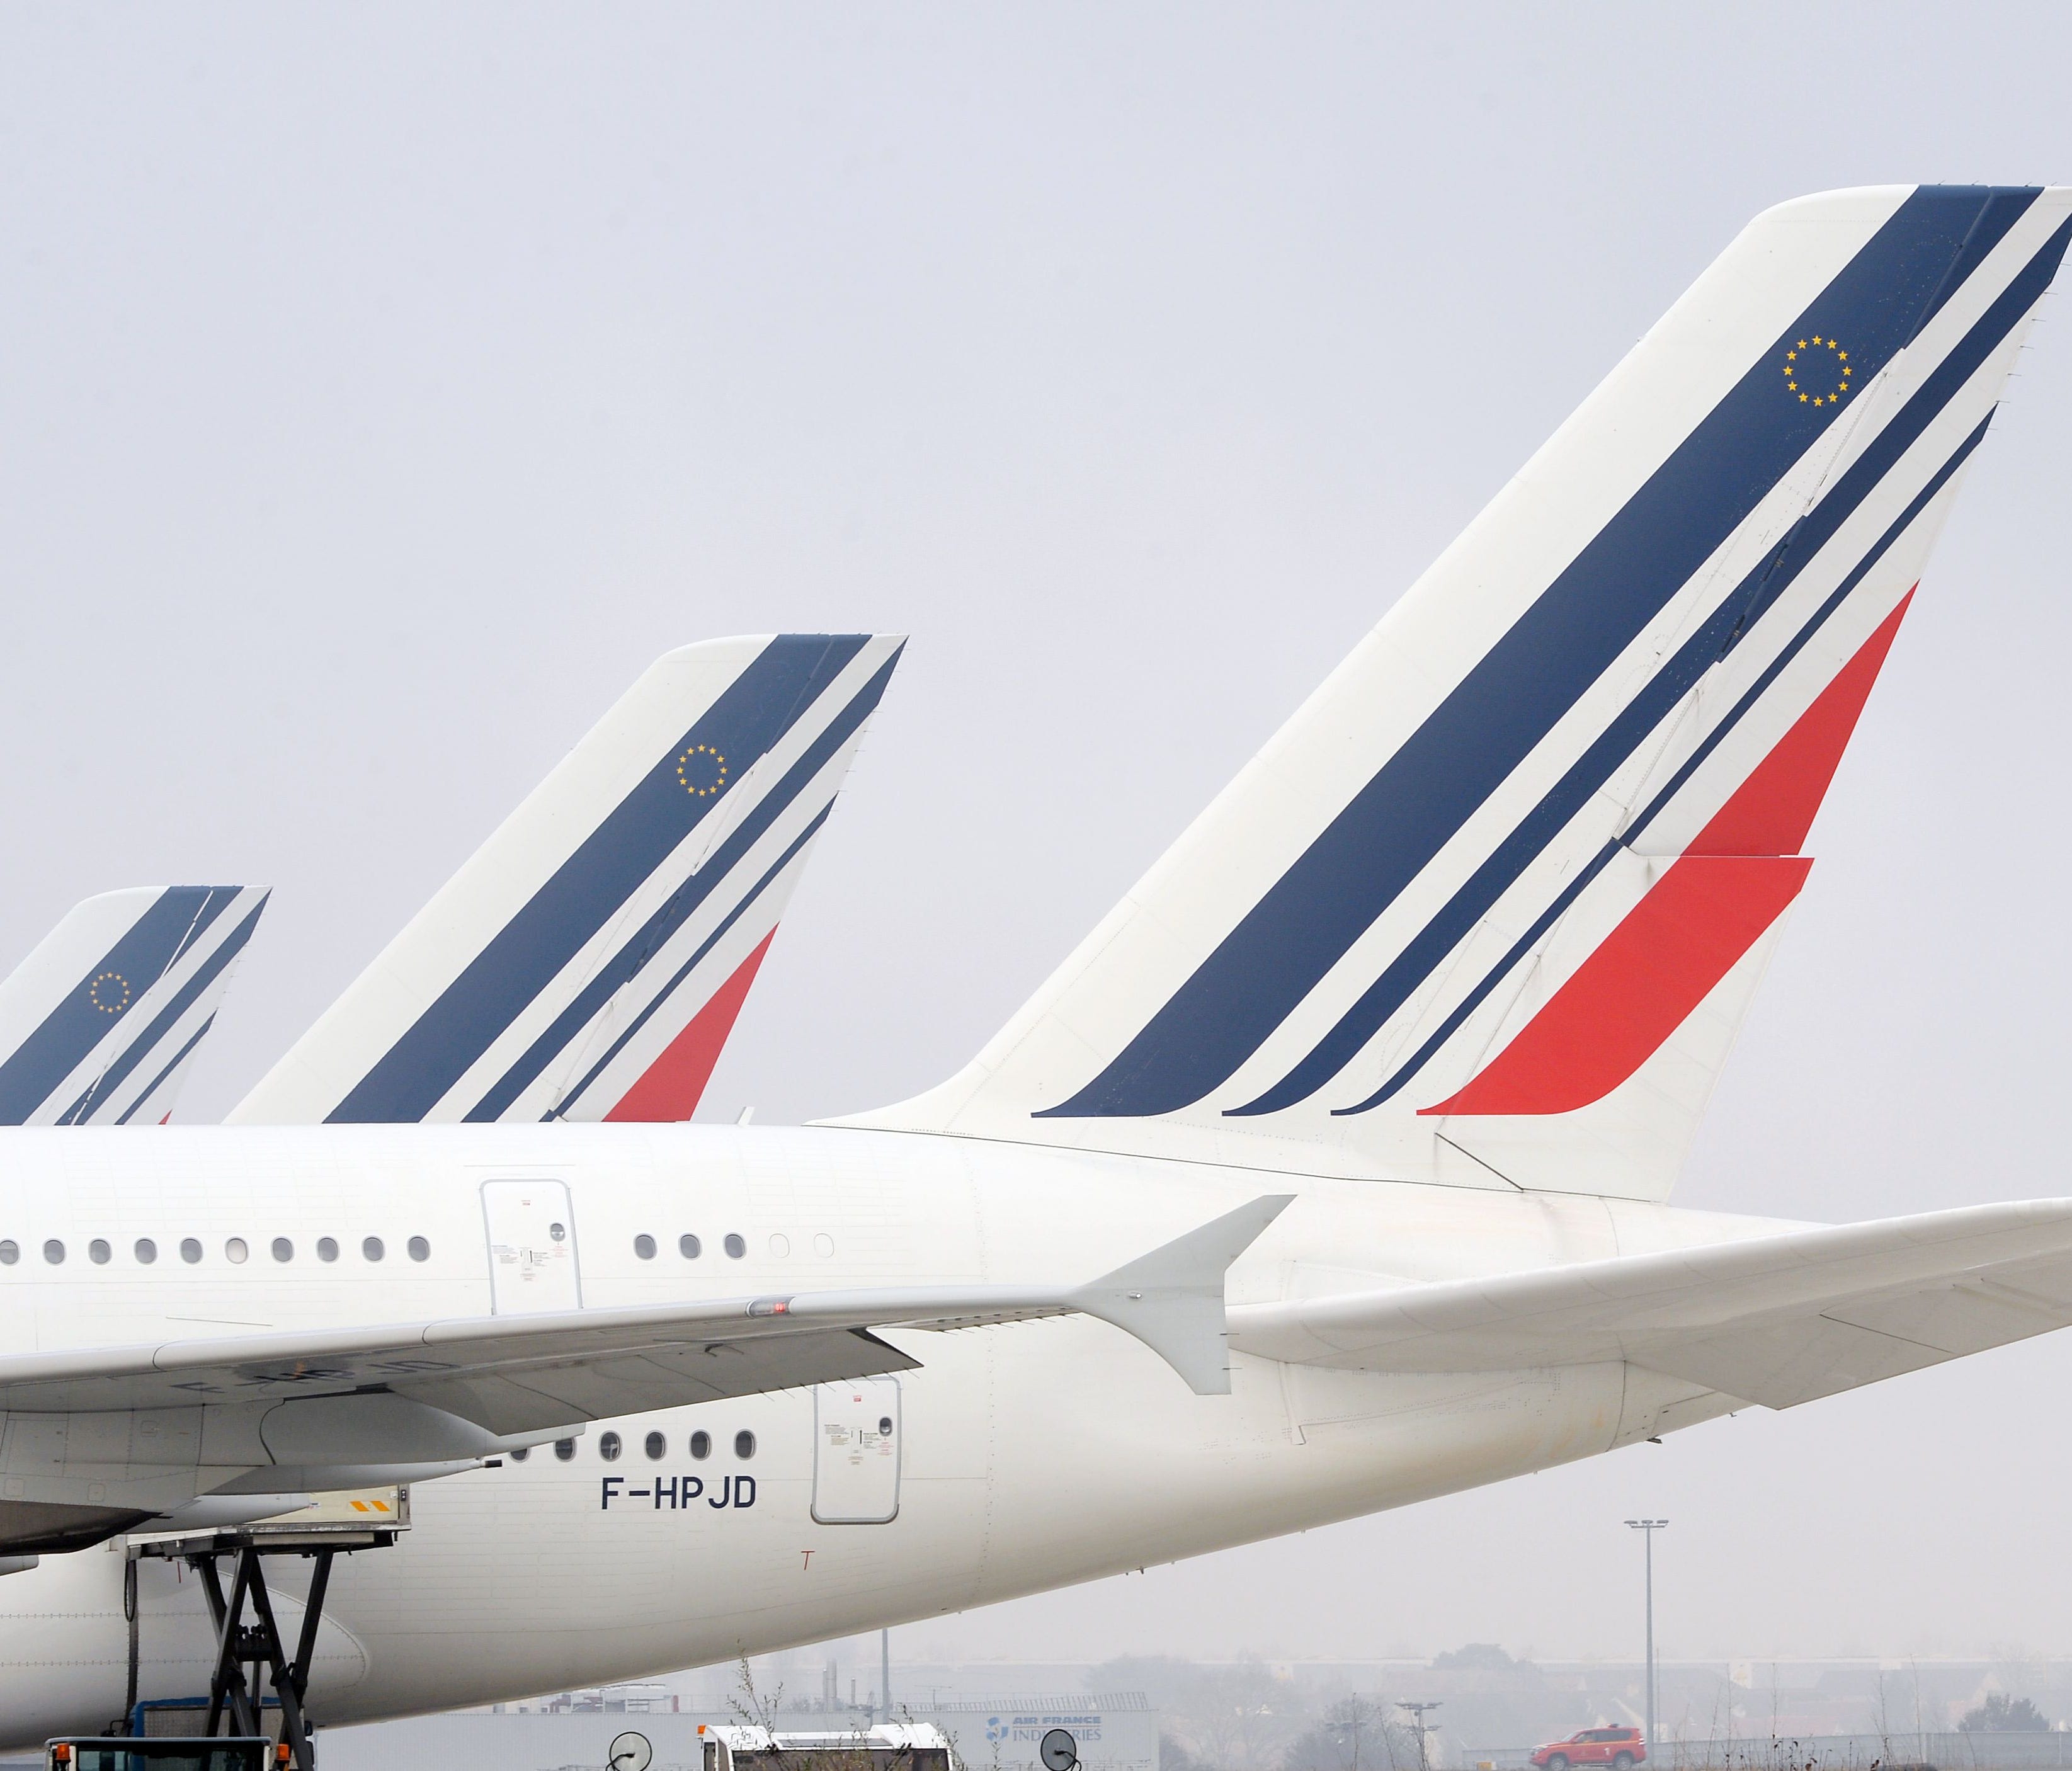 Air France is offering mileage awards with substantial discounts in economy and business class for travel during the month of August.